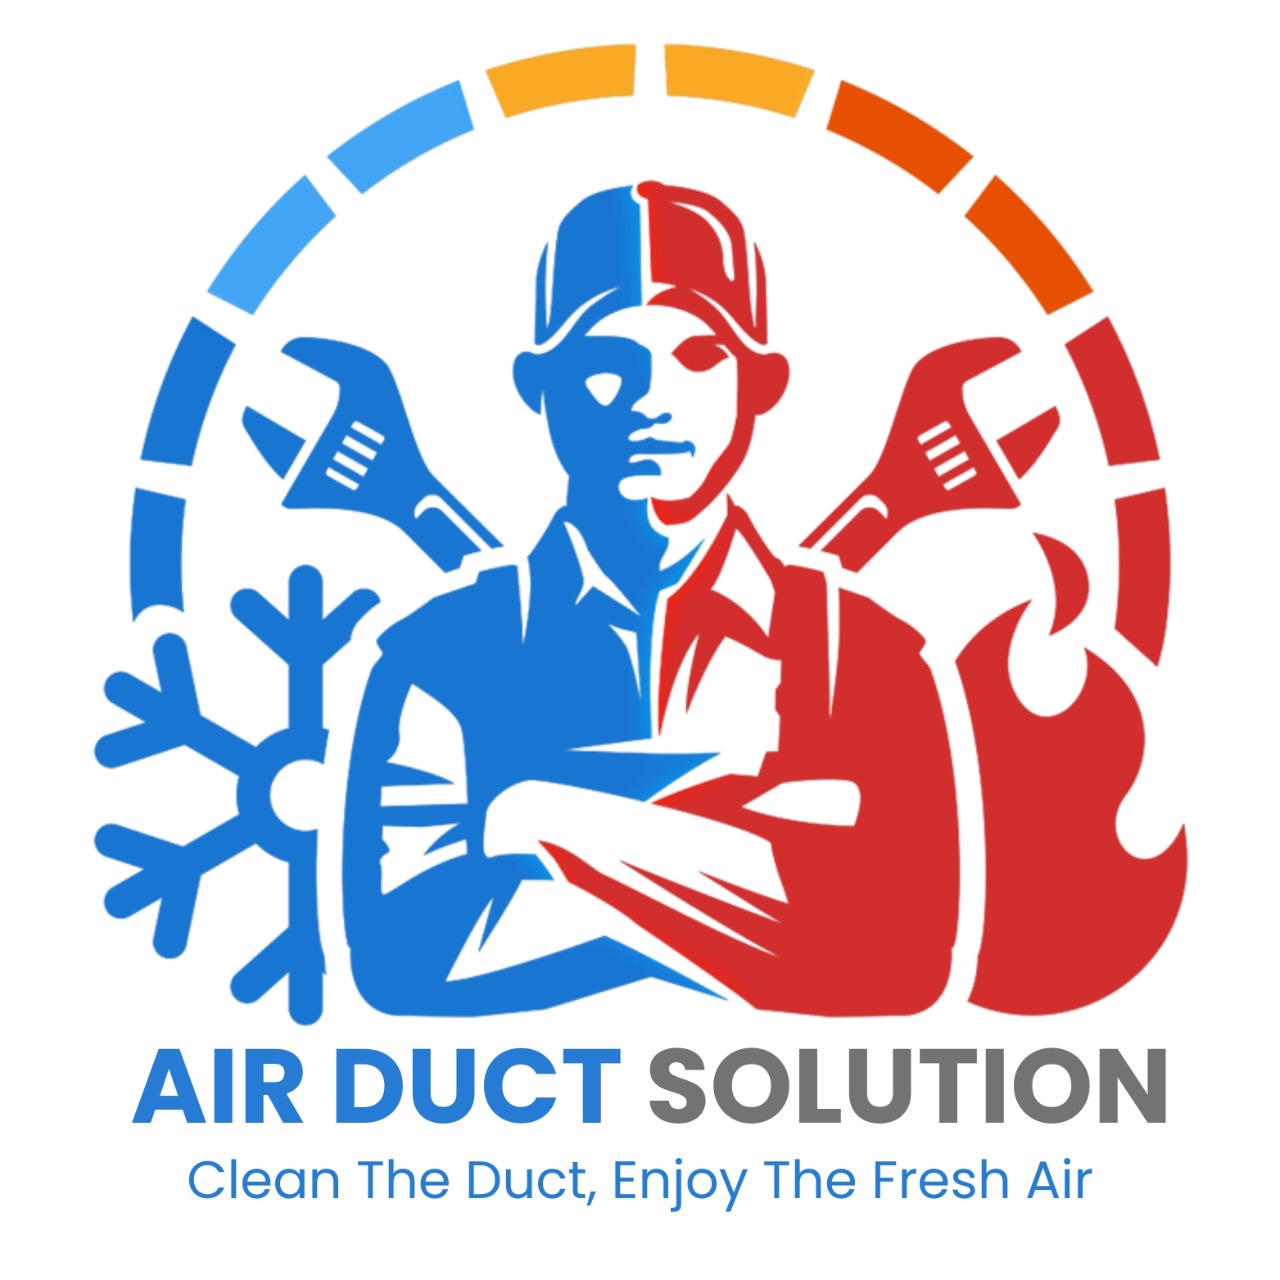 Air Duct Solution Logo